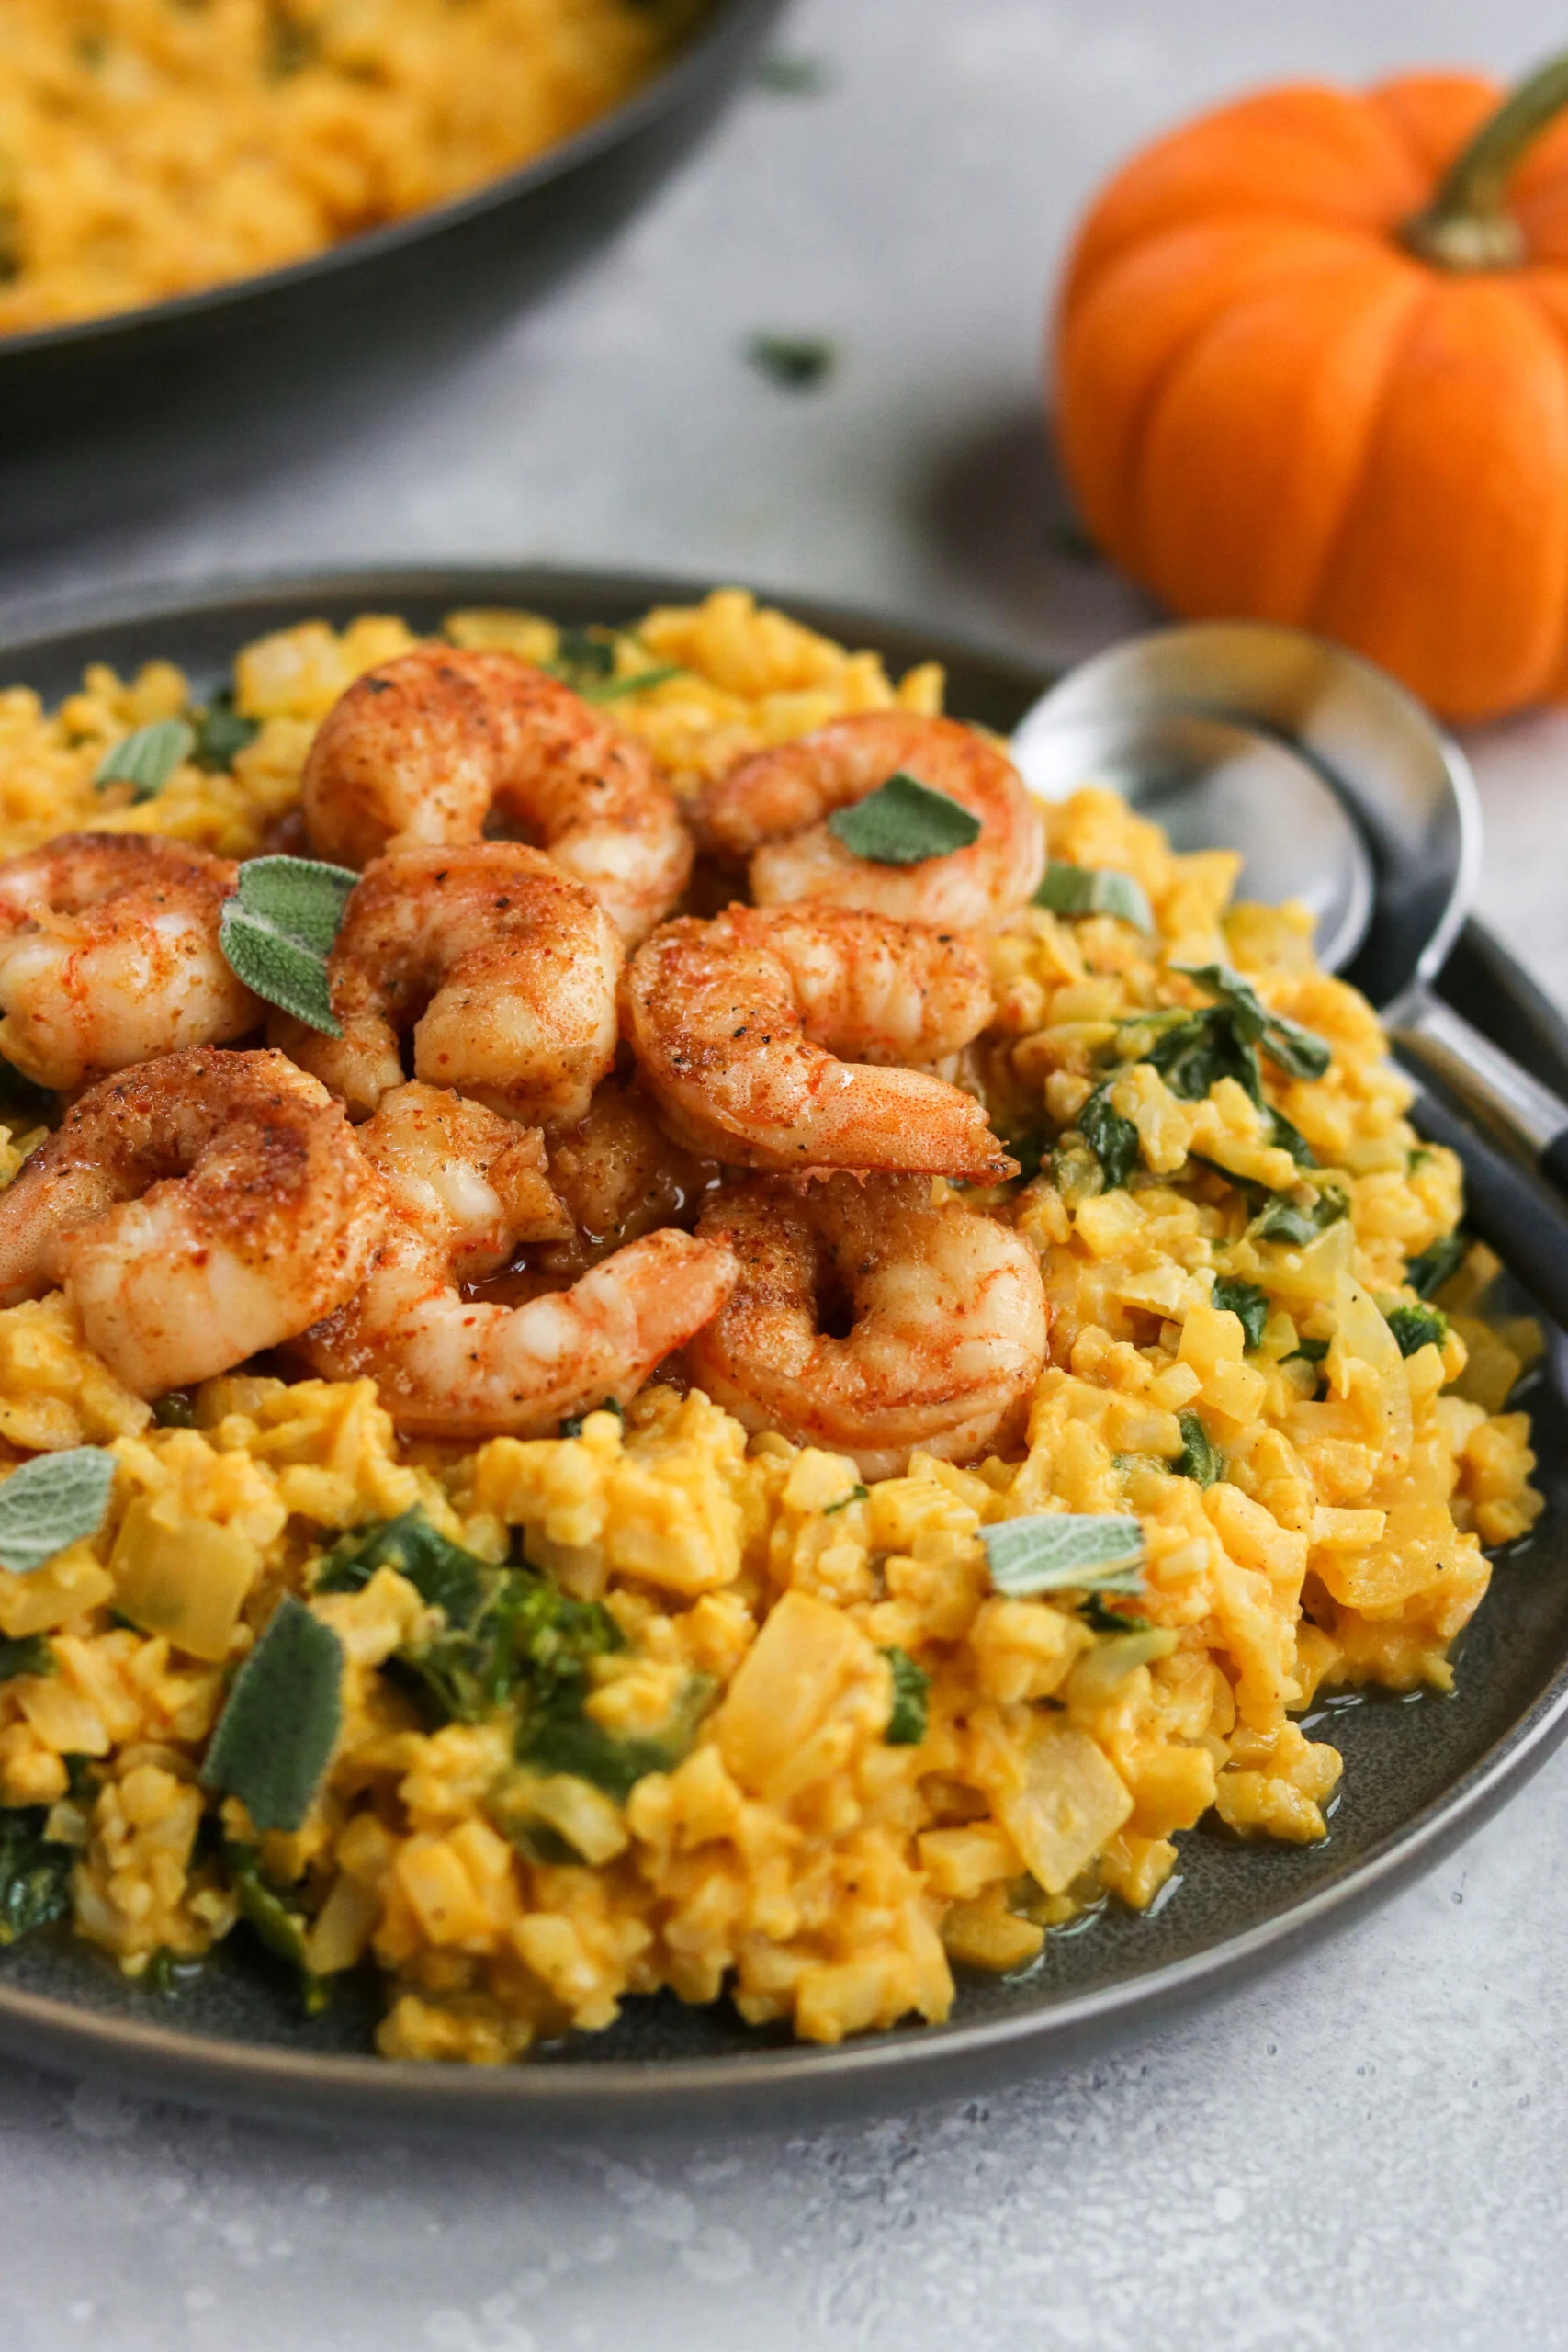 Pumpkin risotto topped with cooked spiced shrimp.